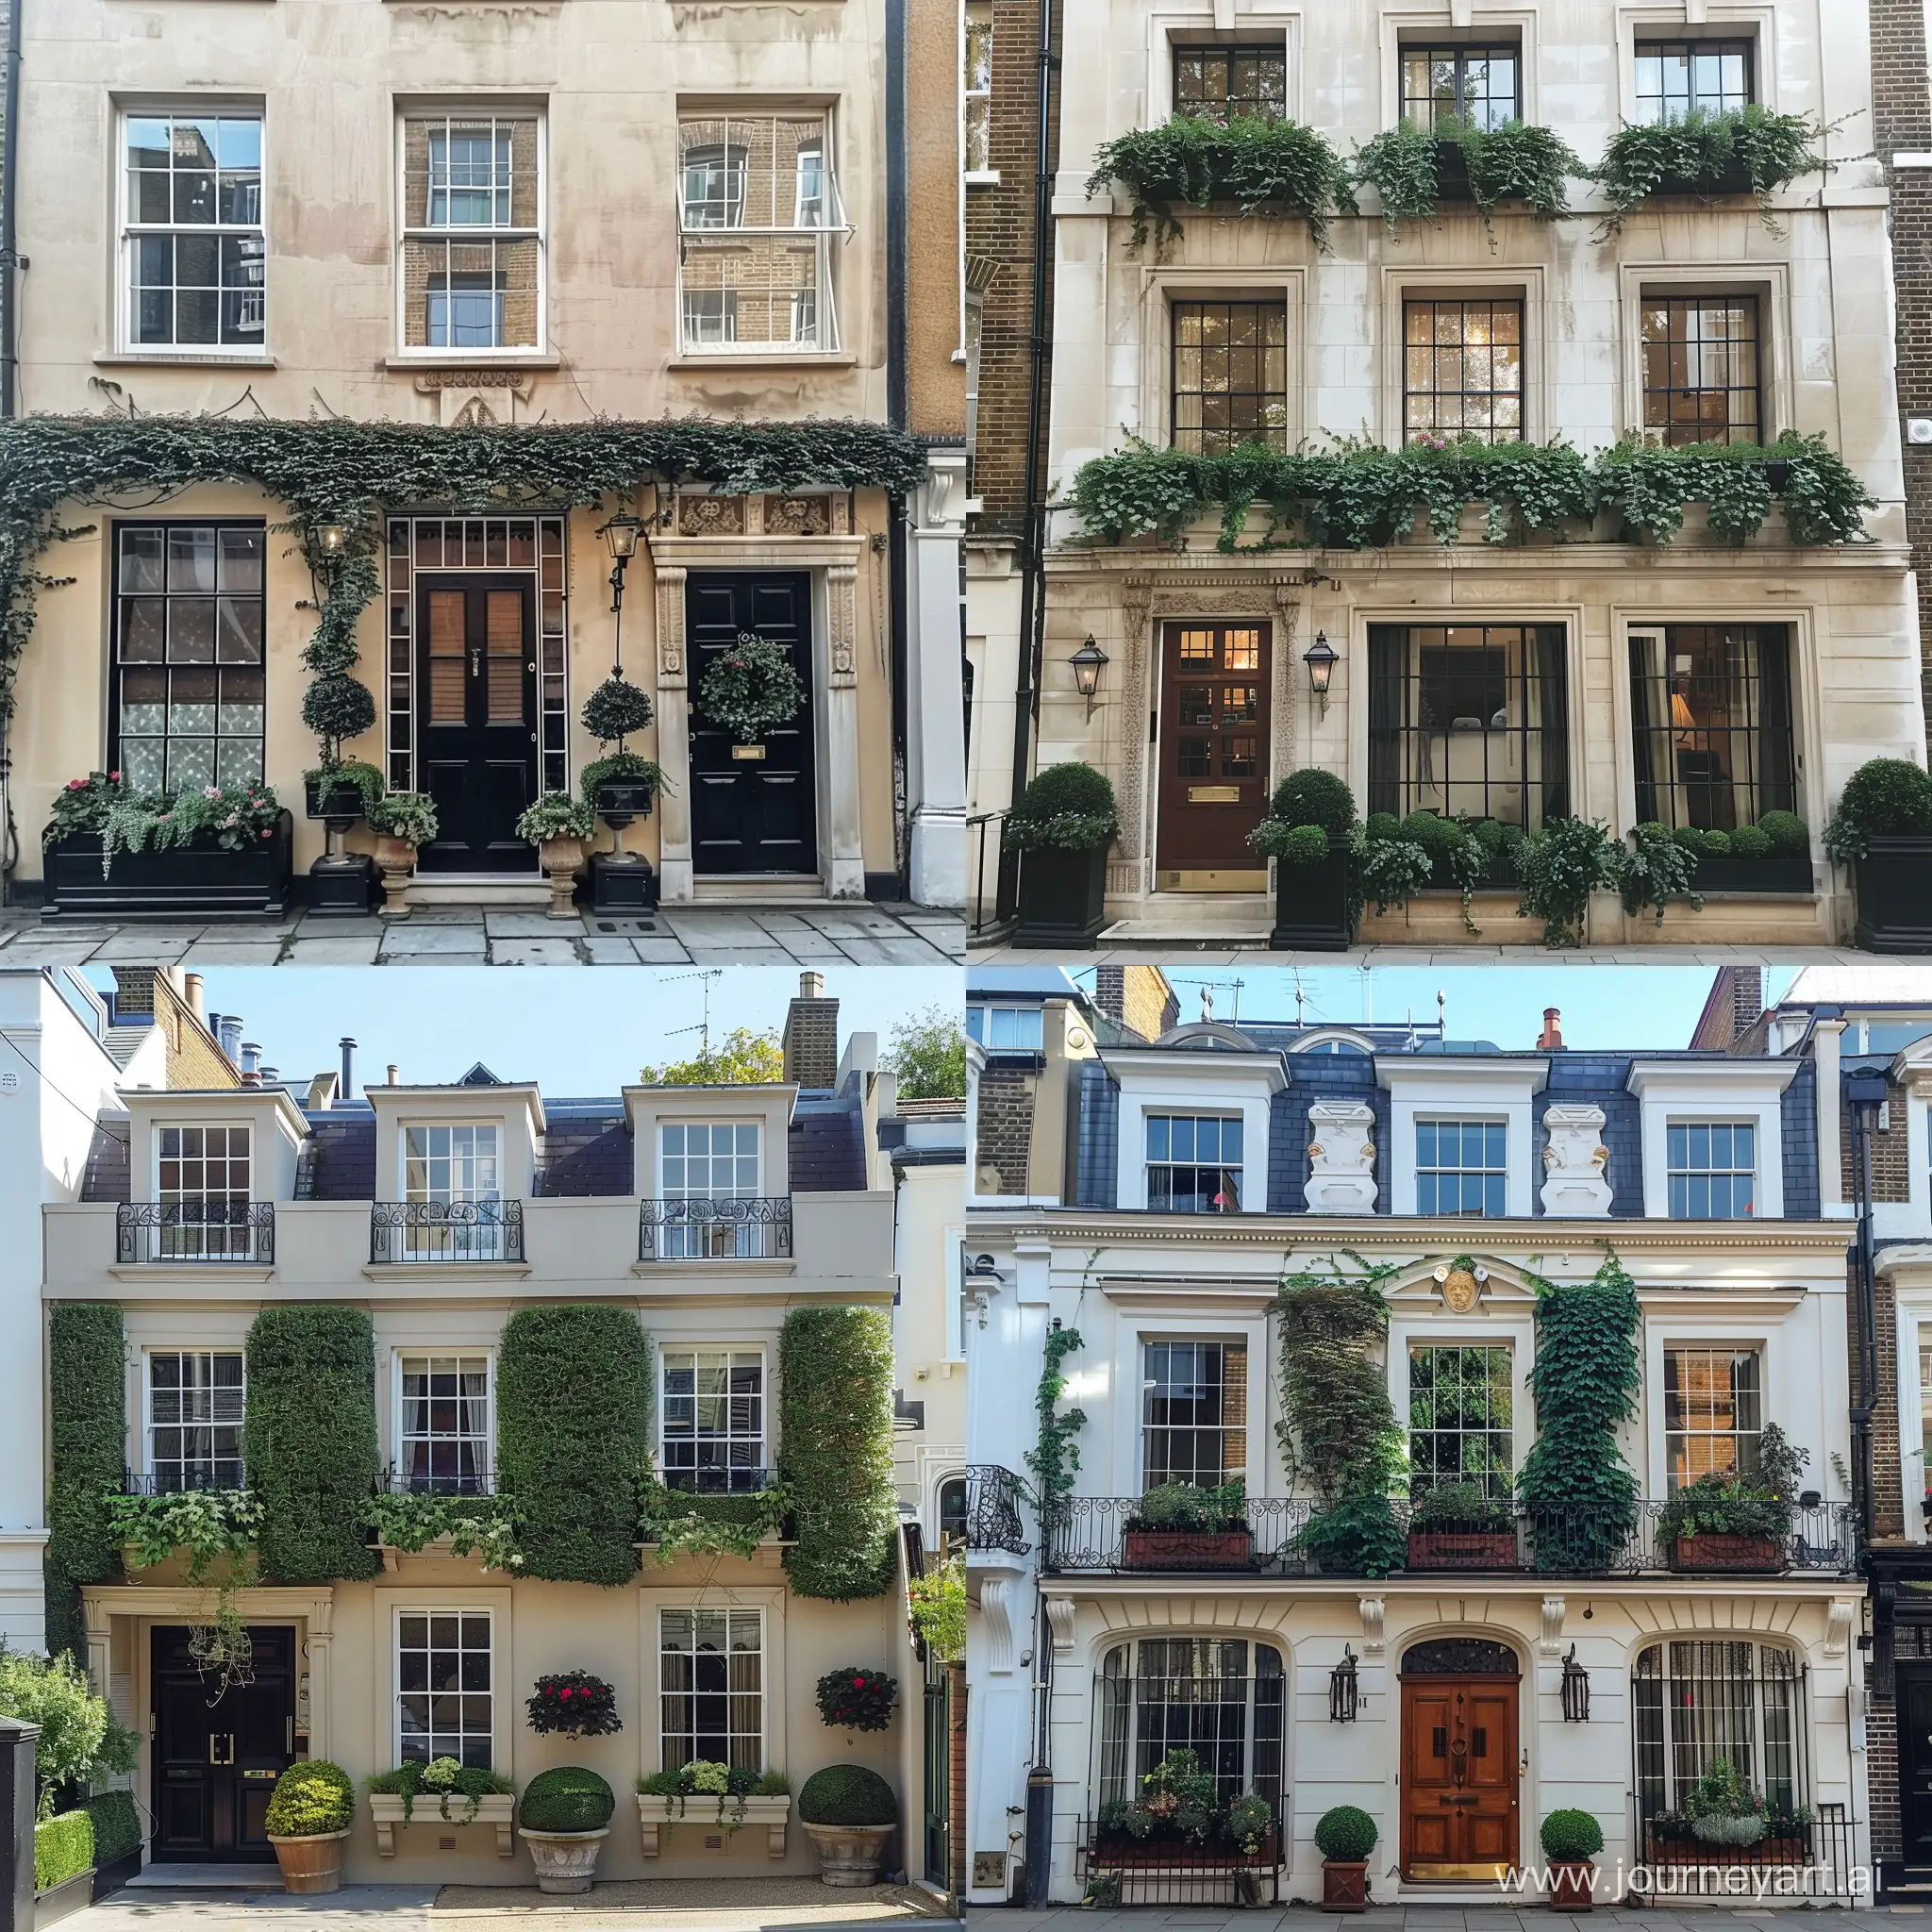 /imagine a stucco frontage town house in London with hedging ivy in window boxes on the front of the propert
